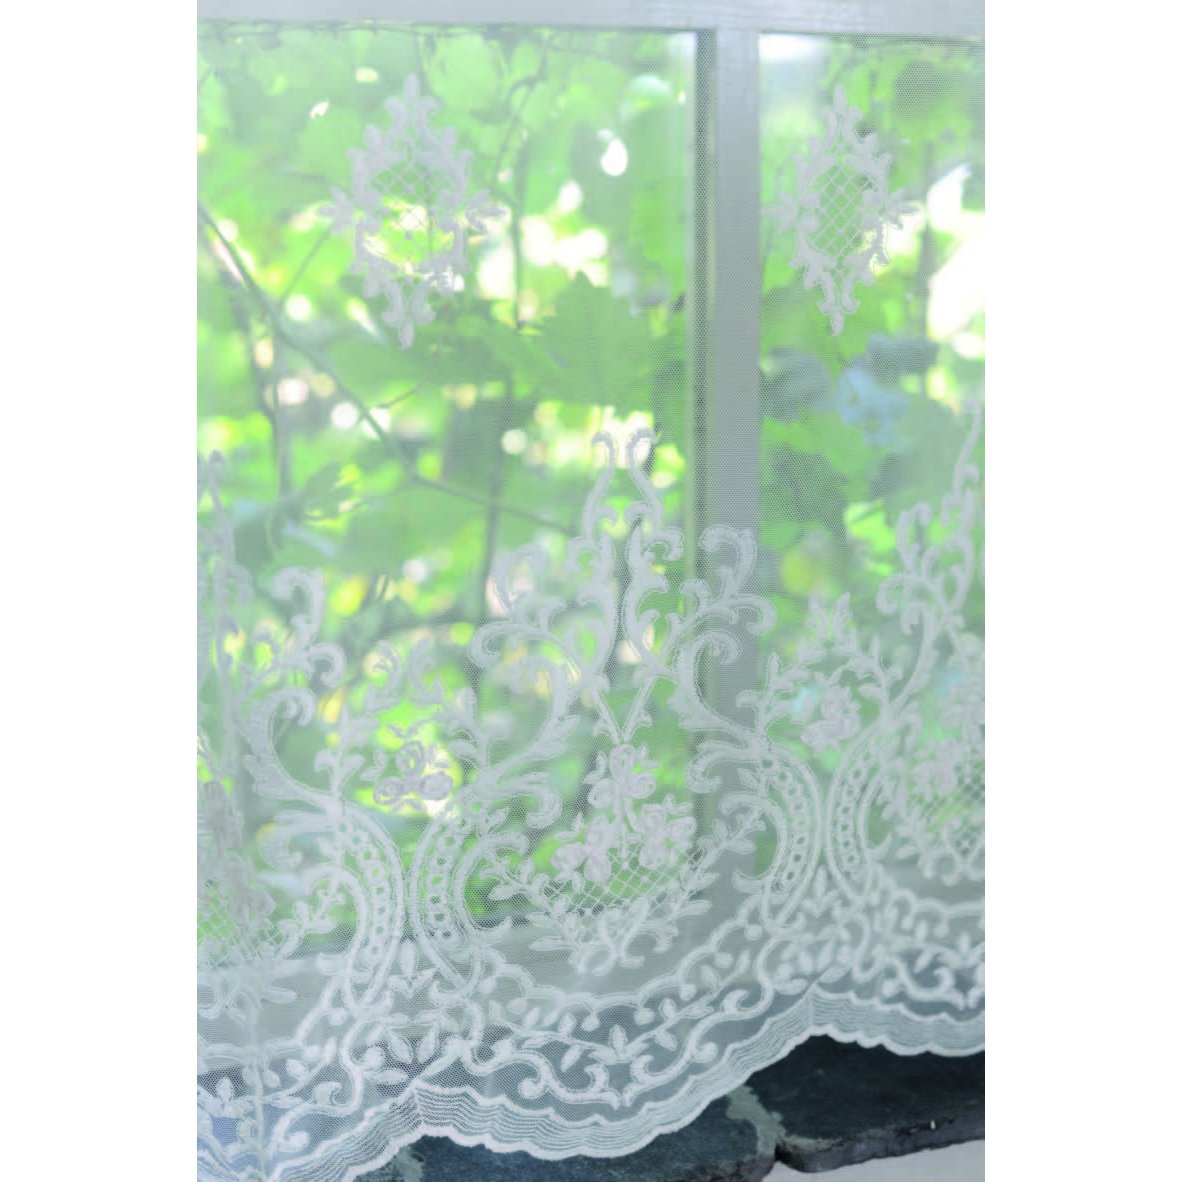 Elegant off-white lace curtain with intricate embroidery.